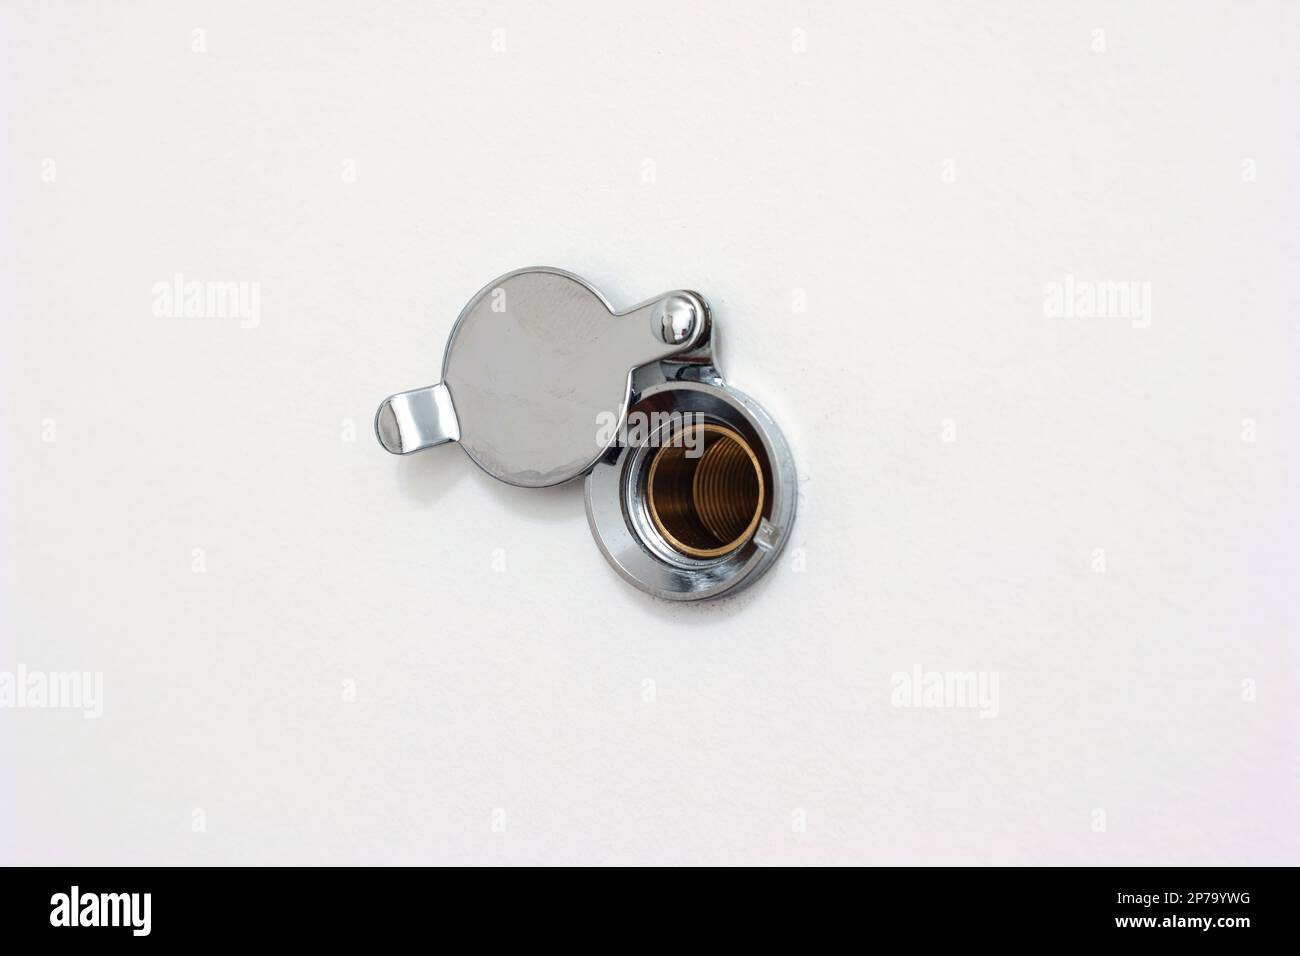 Home door peephole with metal lid cover white wood background macro close up shot. Stock Photo